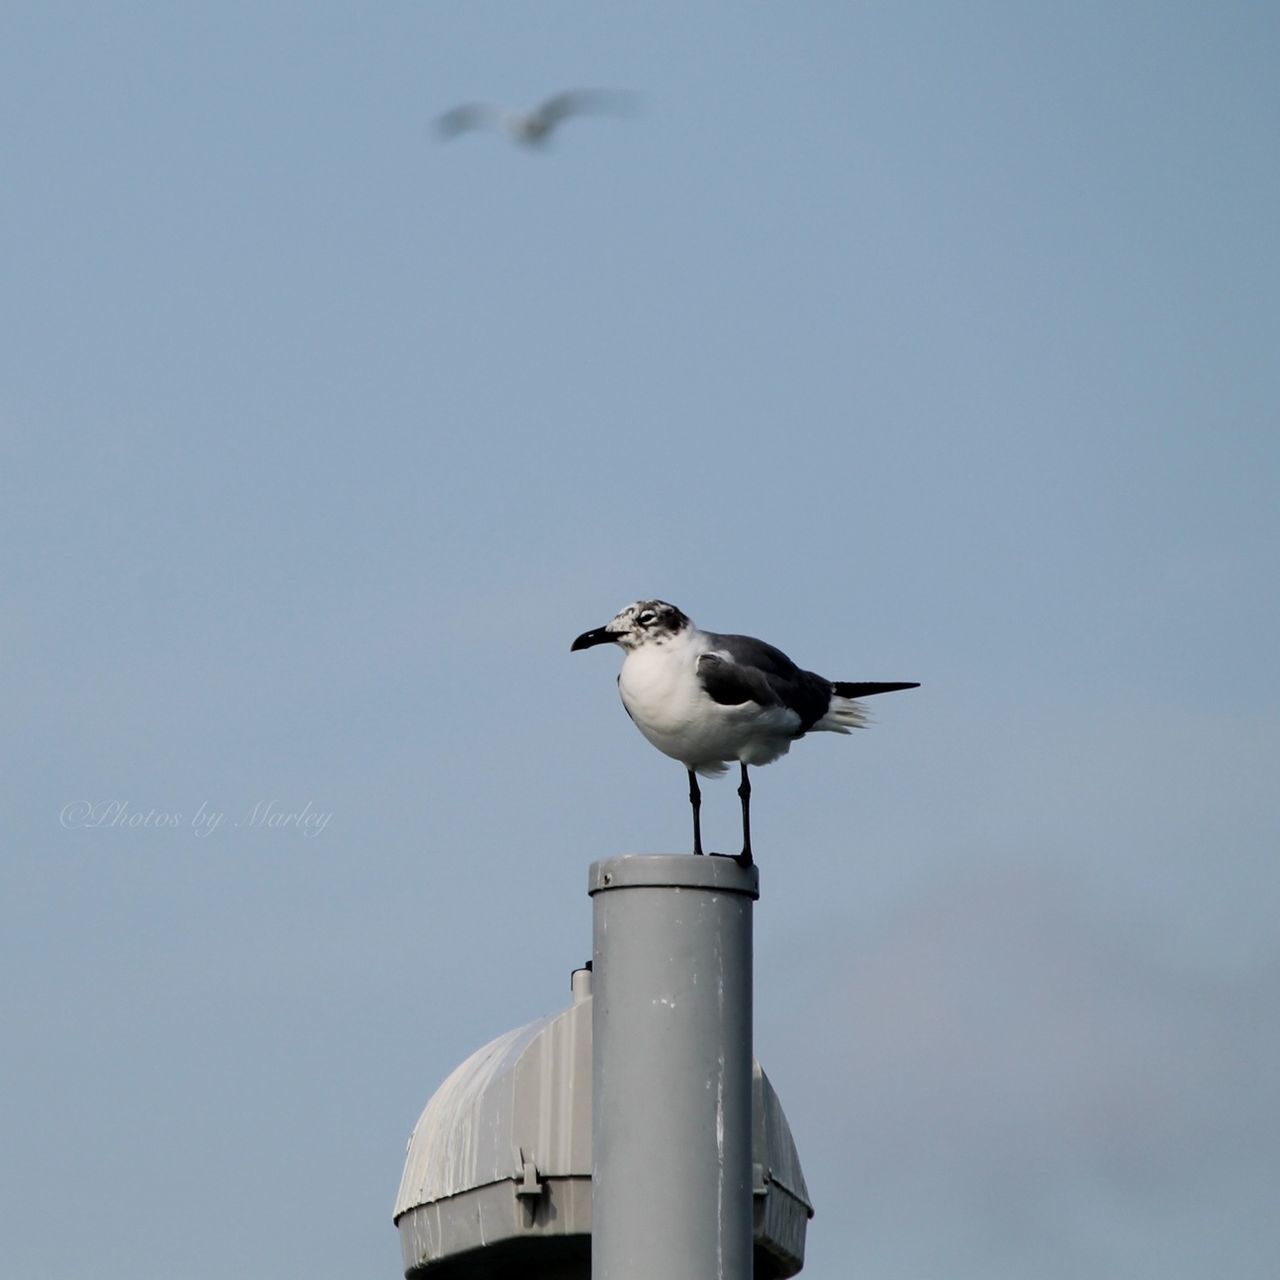 bird, animal themes, animals in the wild, wildlife, seagull, one animal, perching, clear sky, flying, low angle view, copy space, spread wings, day, nature, outdoors, focus on foreground, sky, sea bird, no people, built structure